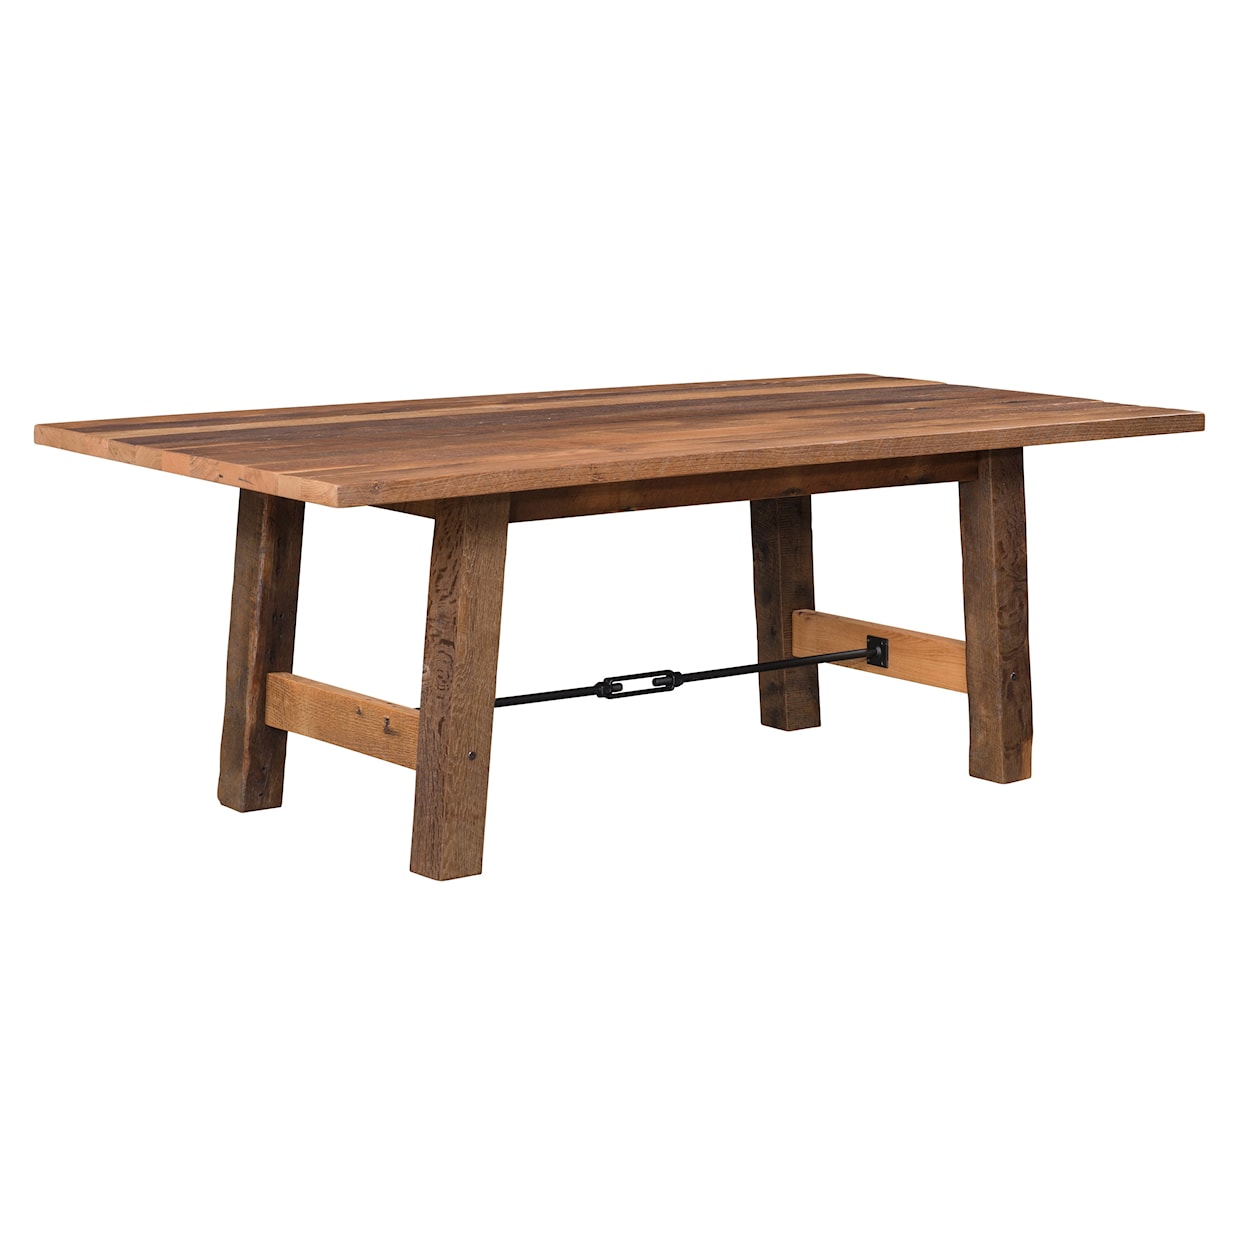 Urban Barnwood Furniture Cleveland Cleveland Solid Top Dining Table